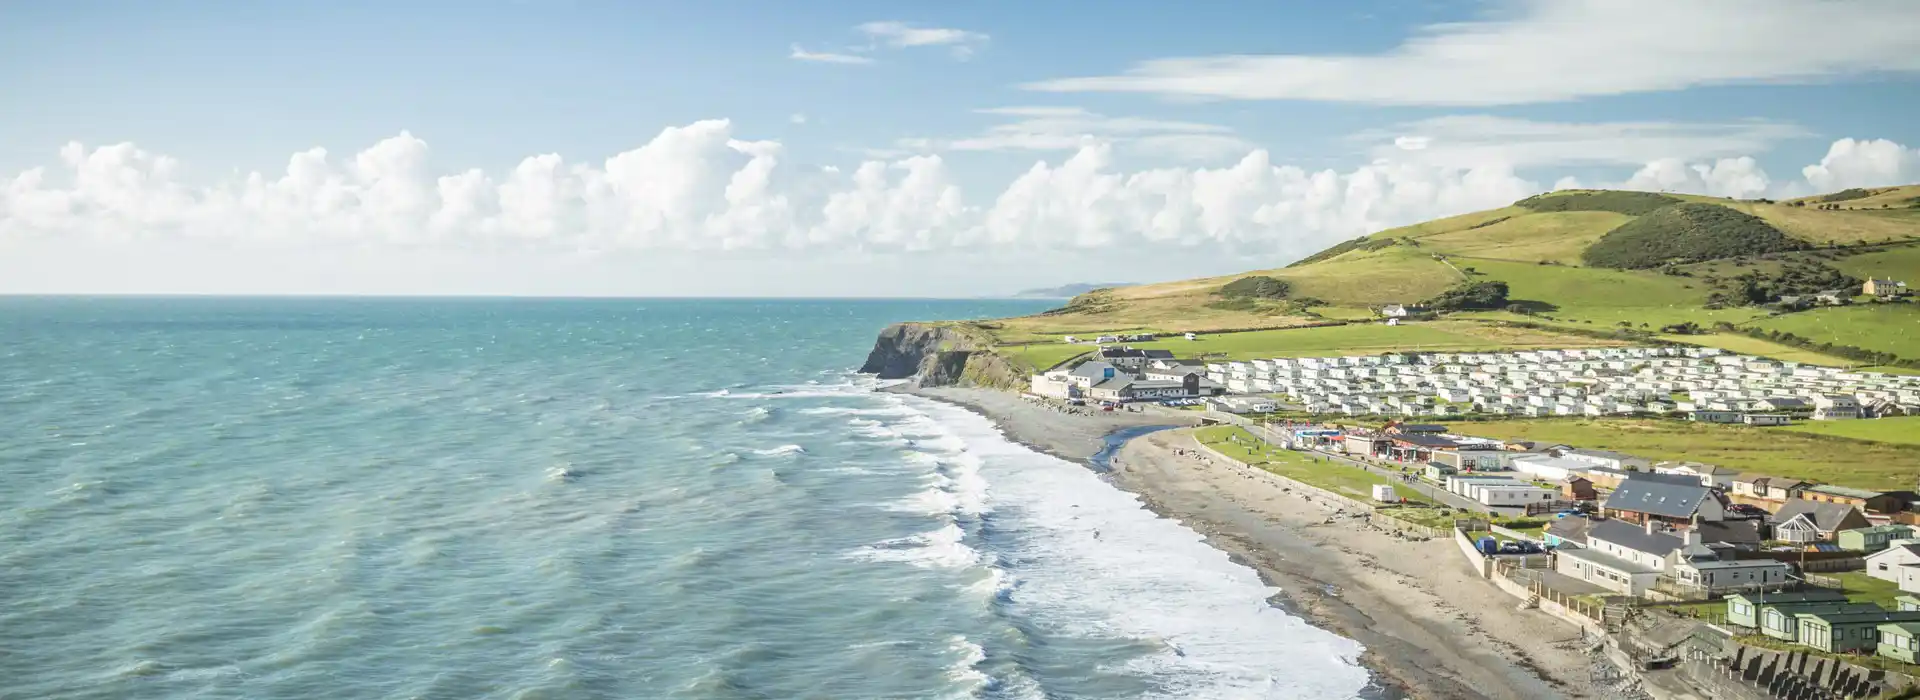 Campsites on the Wales Coast